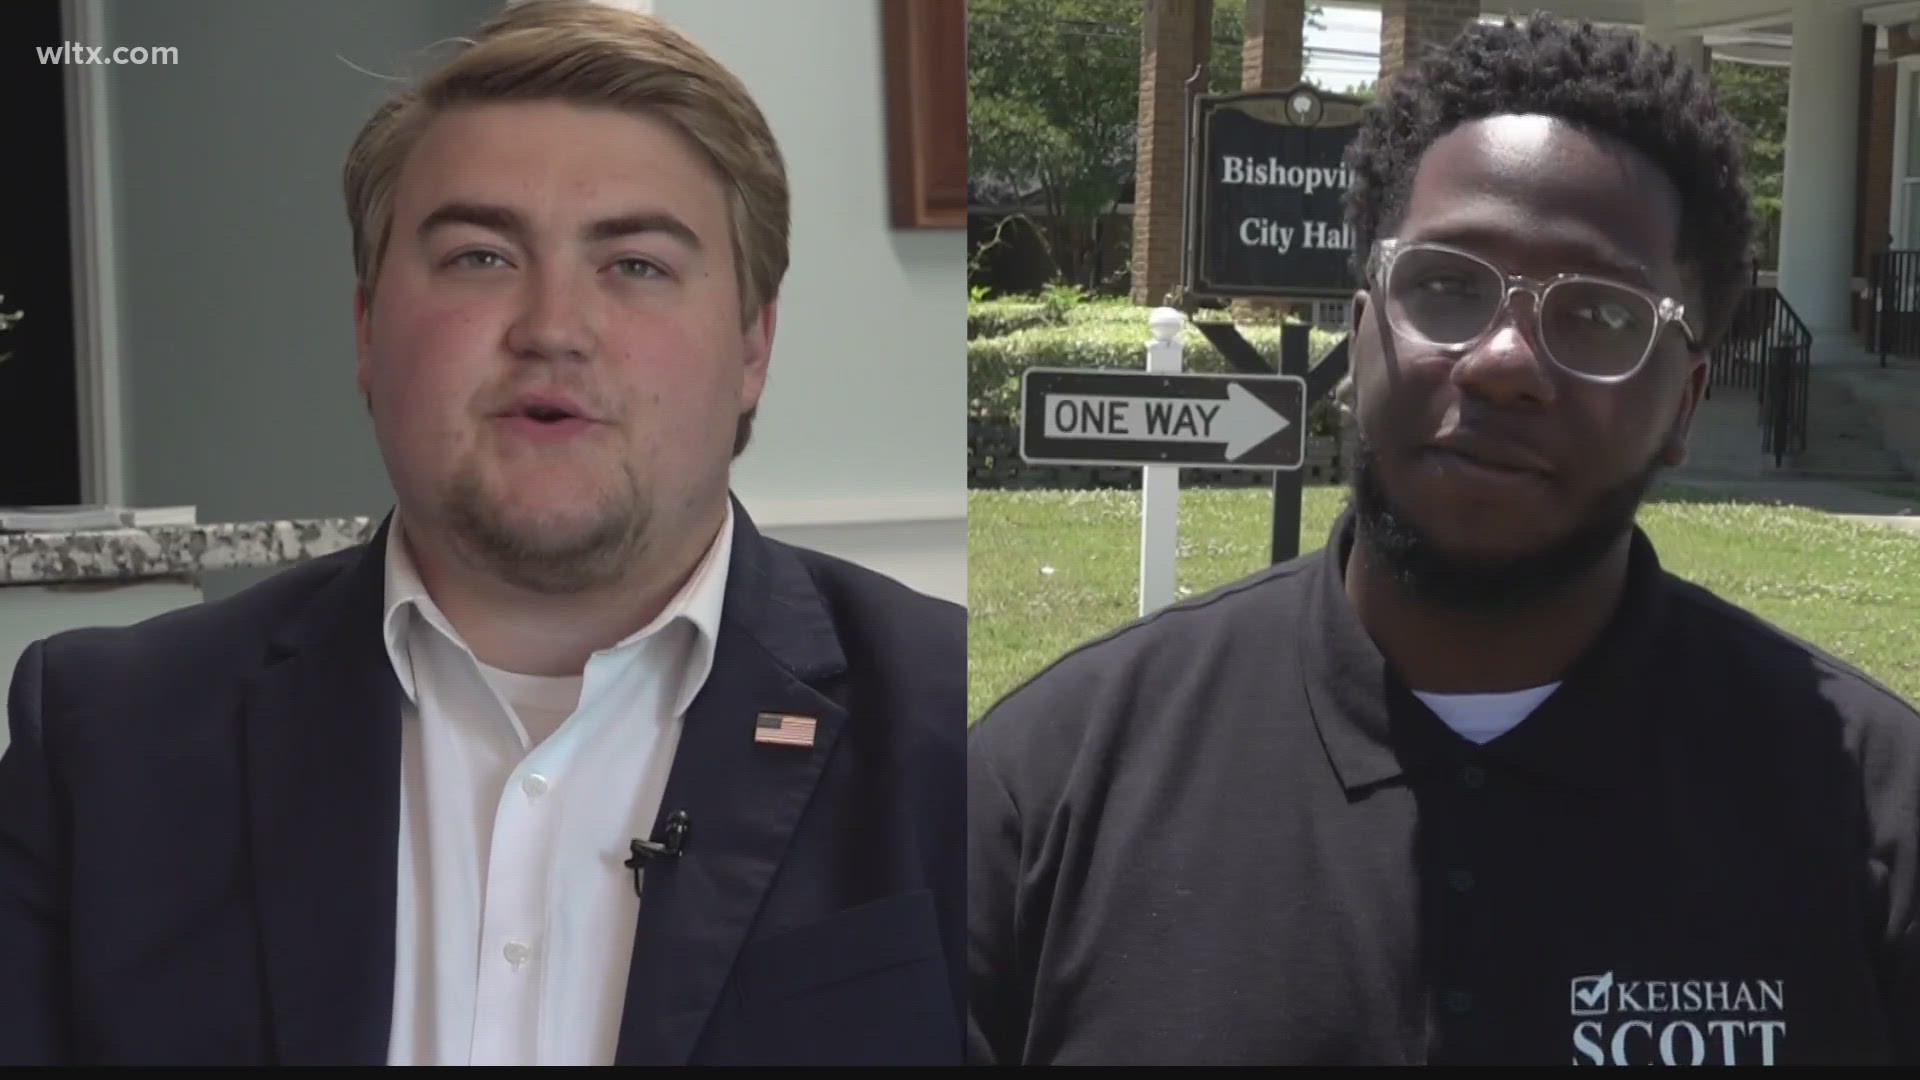 A 21-year-old was voted in as mayor and a 22-year-old will sit on council.